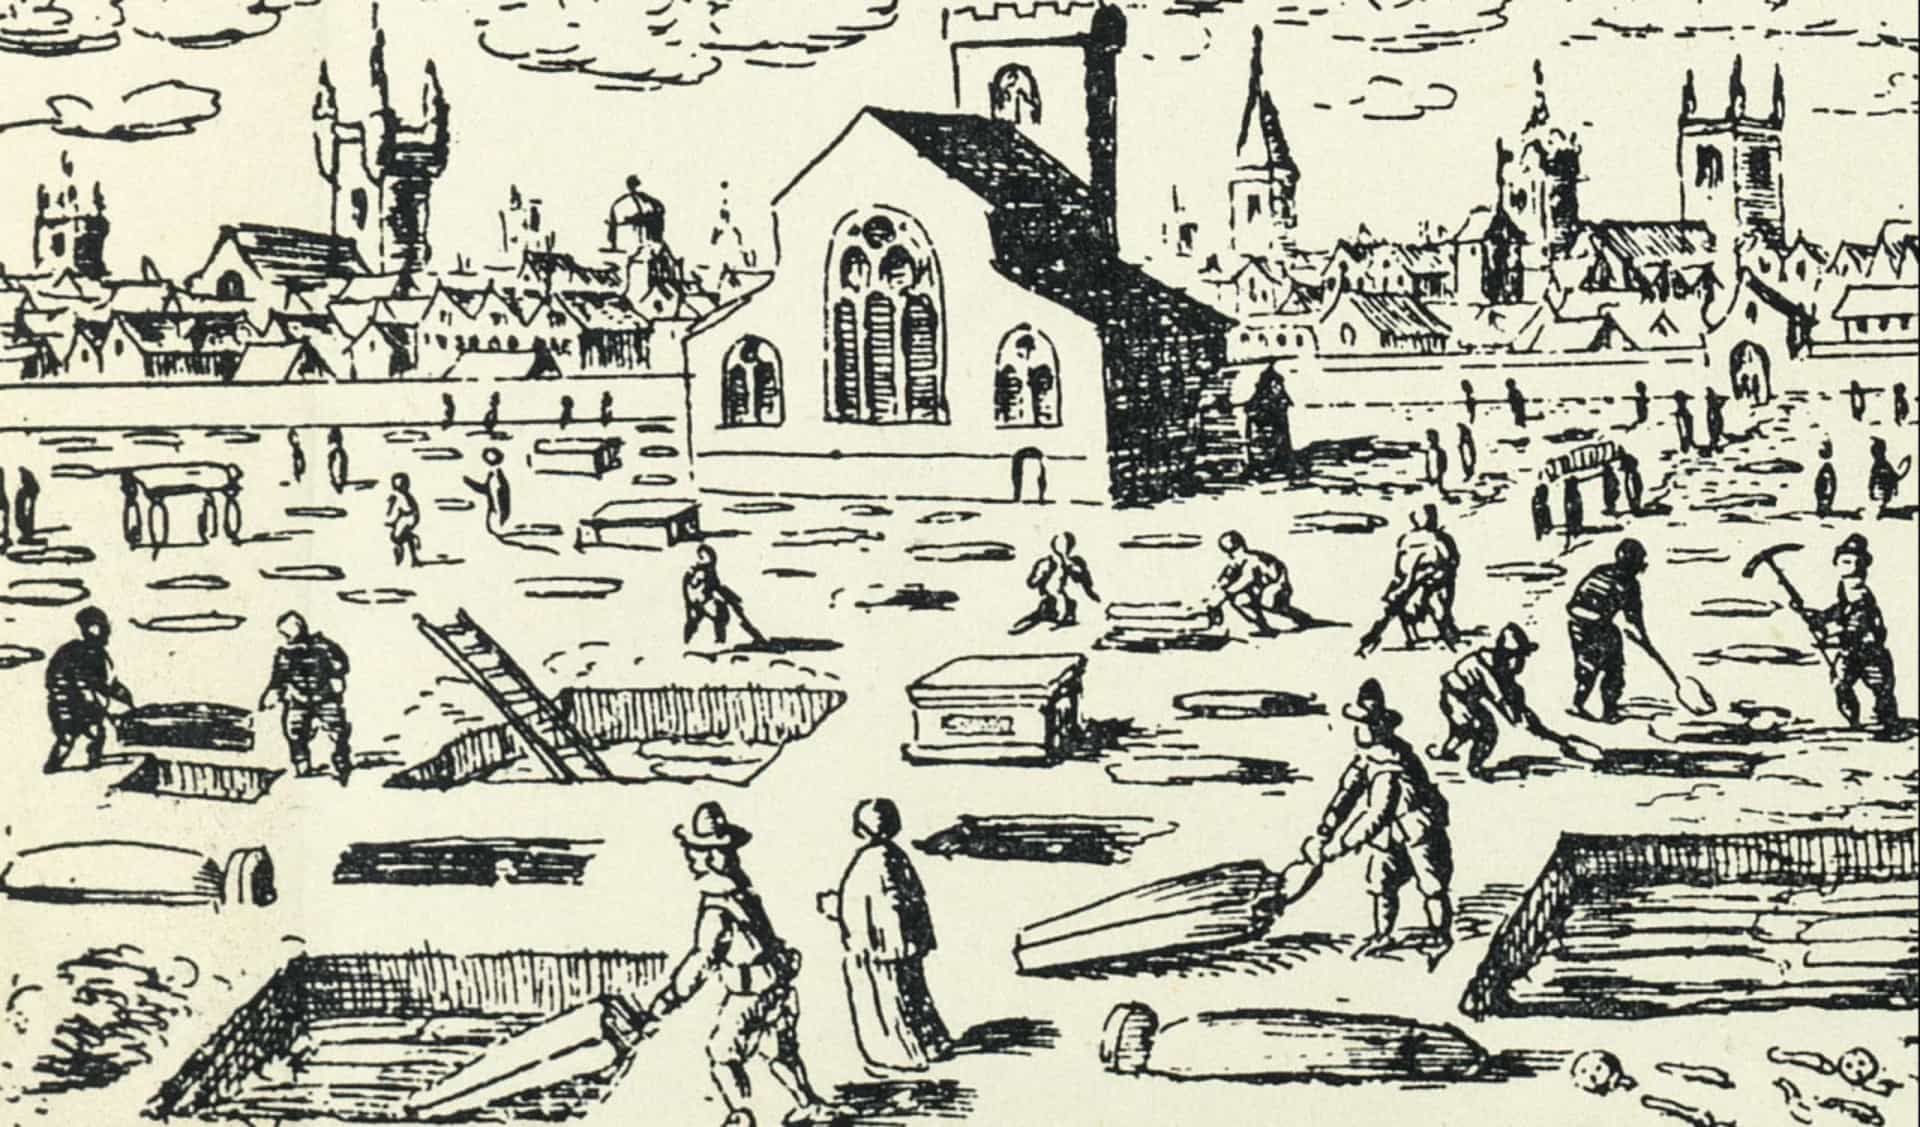 <p>During the Black Death, burying the dead became a grim and risky task. Fearing the highly contagious disease, victims were often buried in mass unmarked graves or "plague pits," regardless of age or gender. The hurried and undignified burials highlighted the disease's devastating impact, disregarding any sense of decorum.</p>